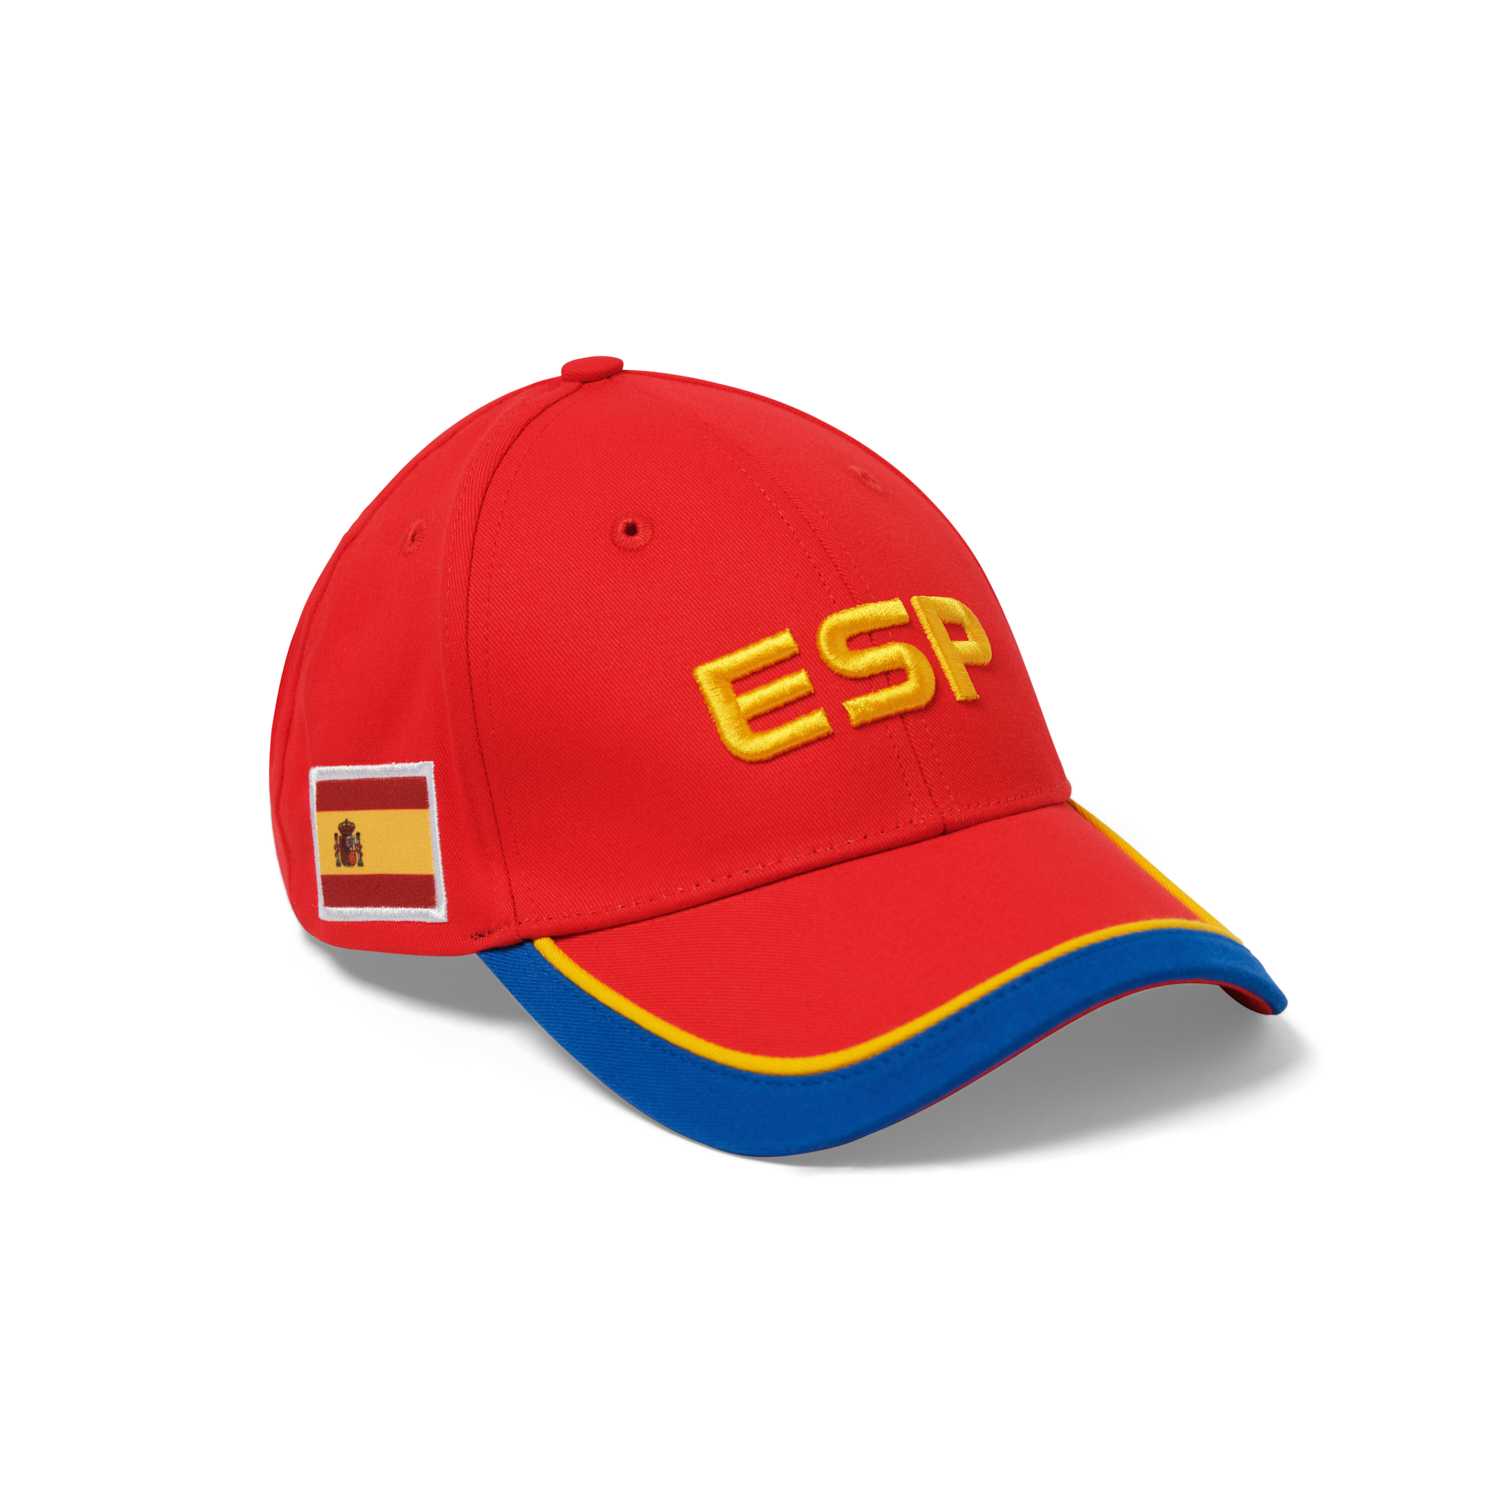 Spain Women's World Cup 2023 Red Cap